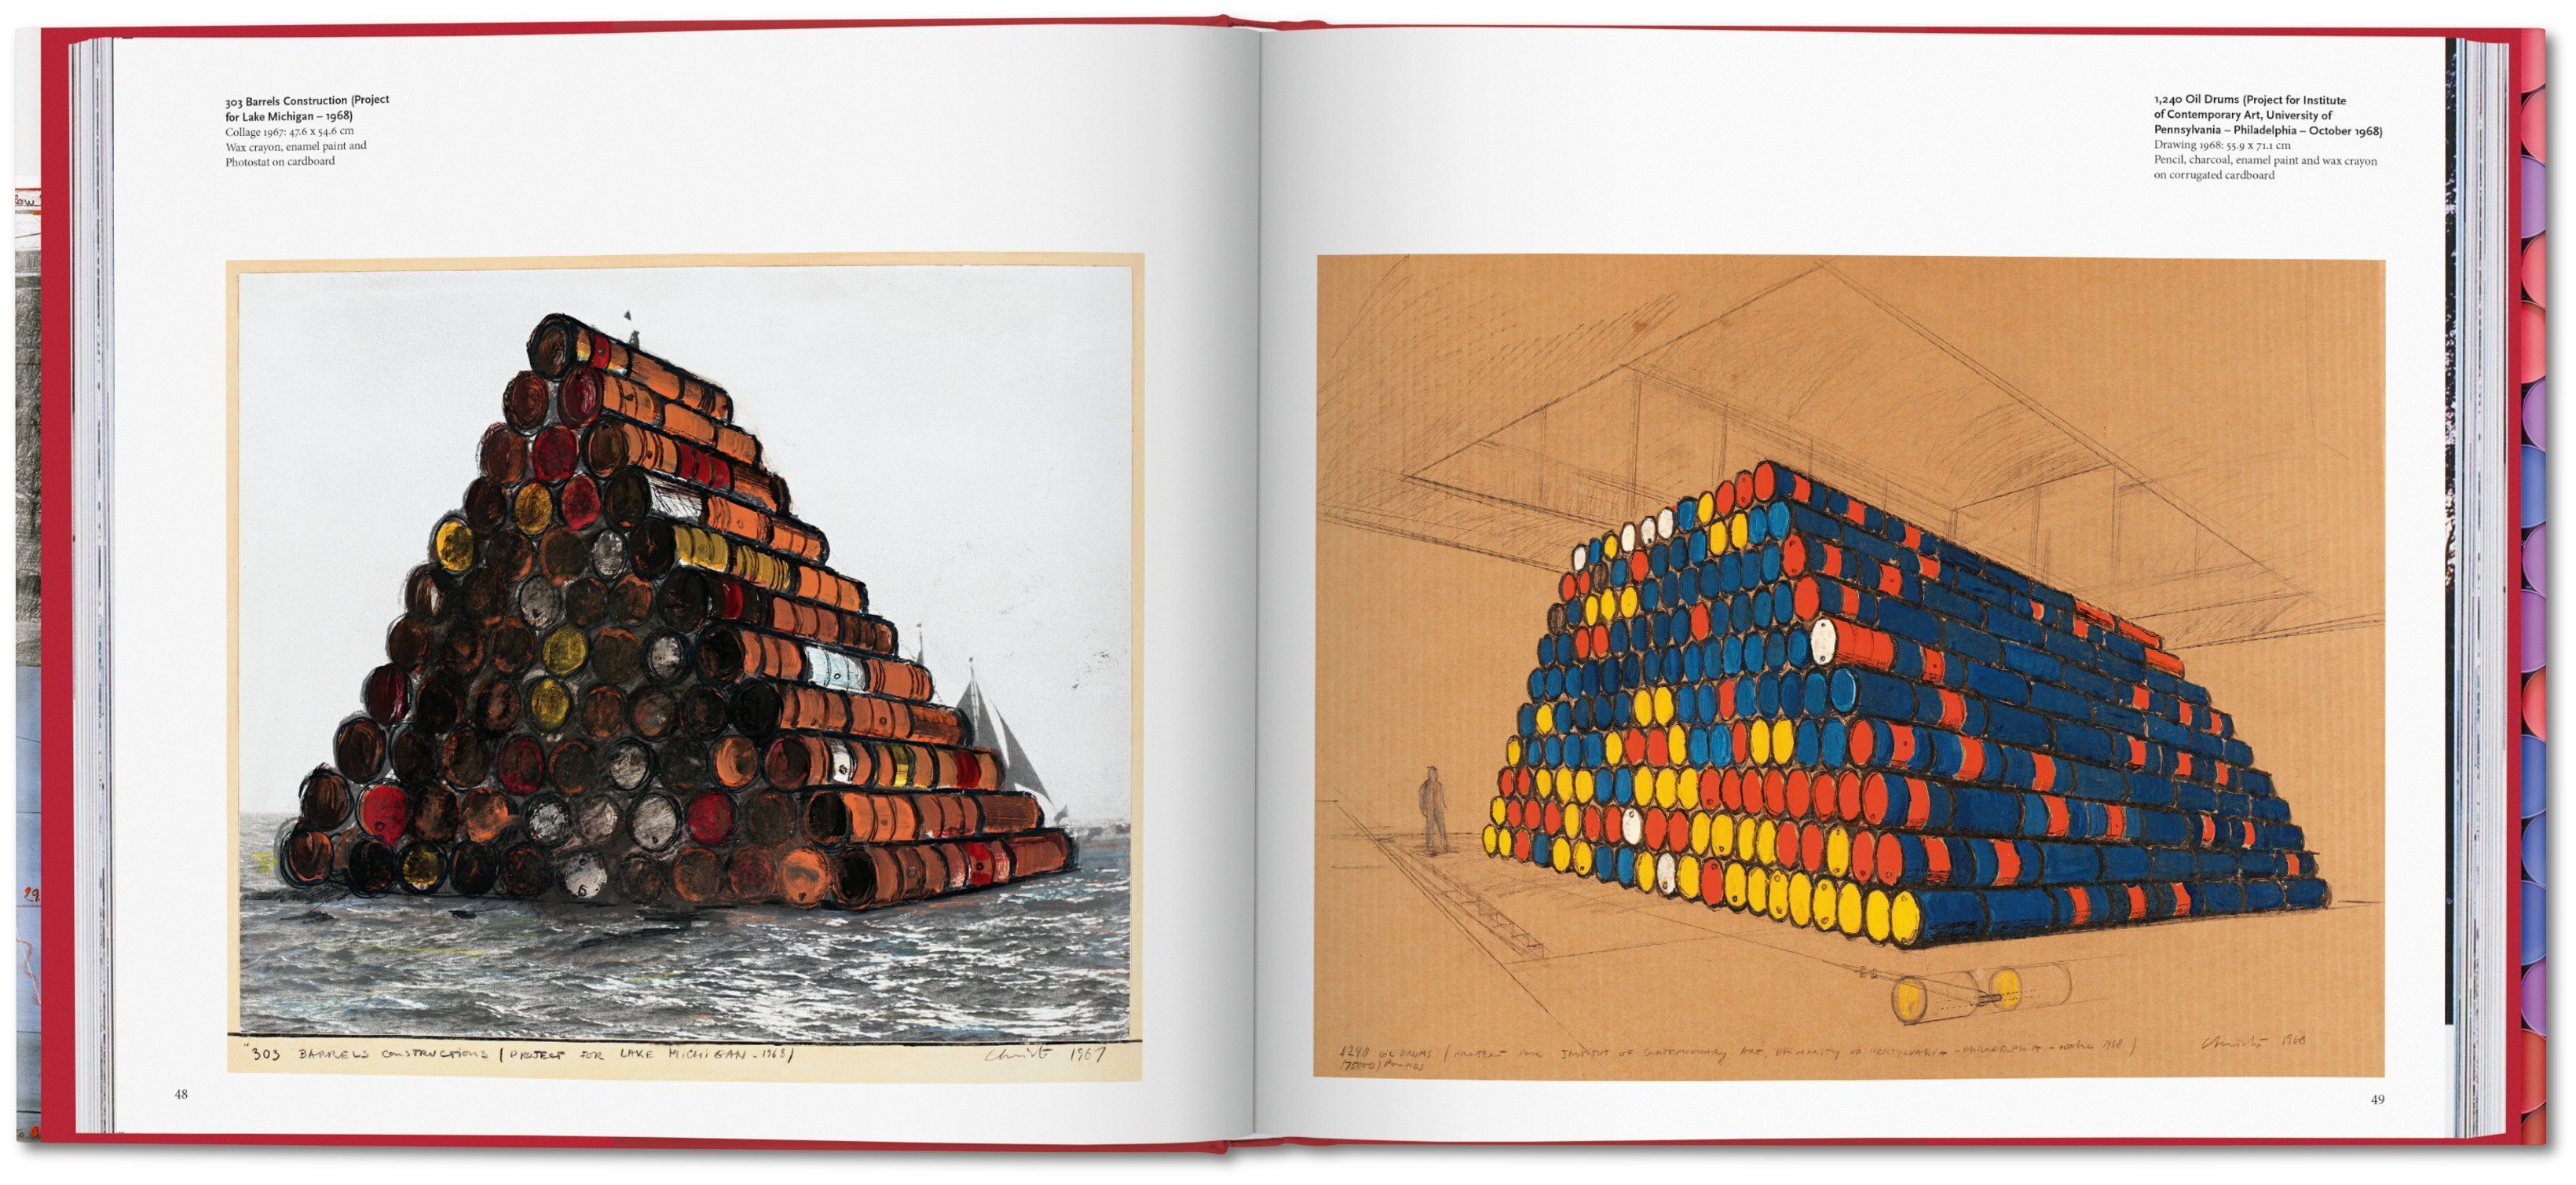 Berlin Art Link Discover TASCHEN book by Christo and Jean Claude